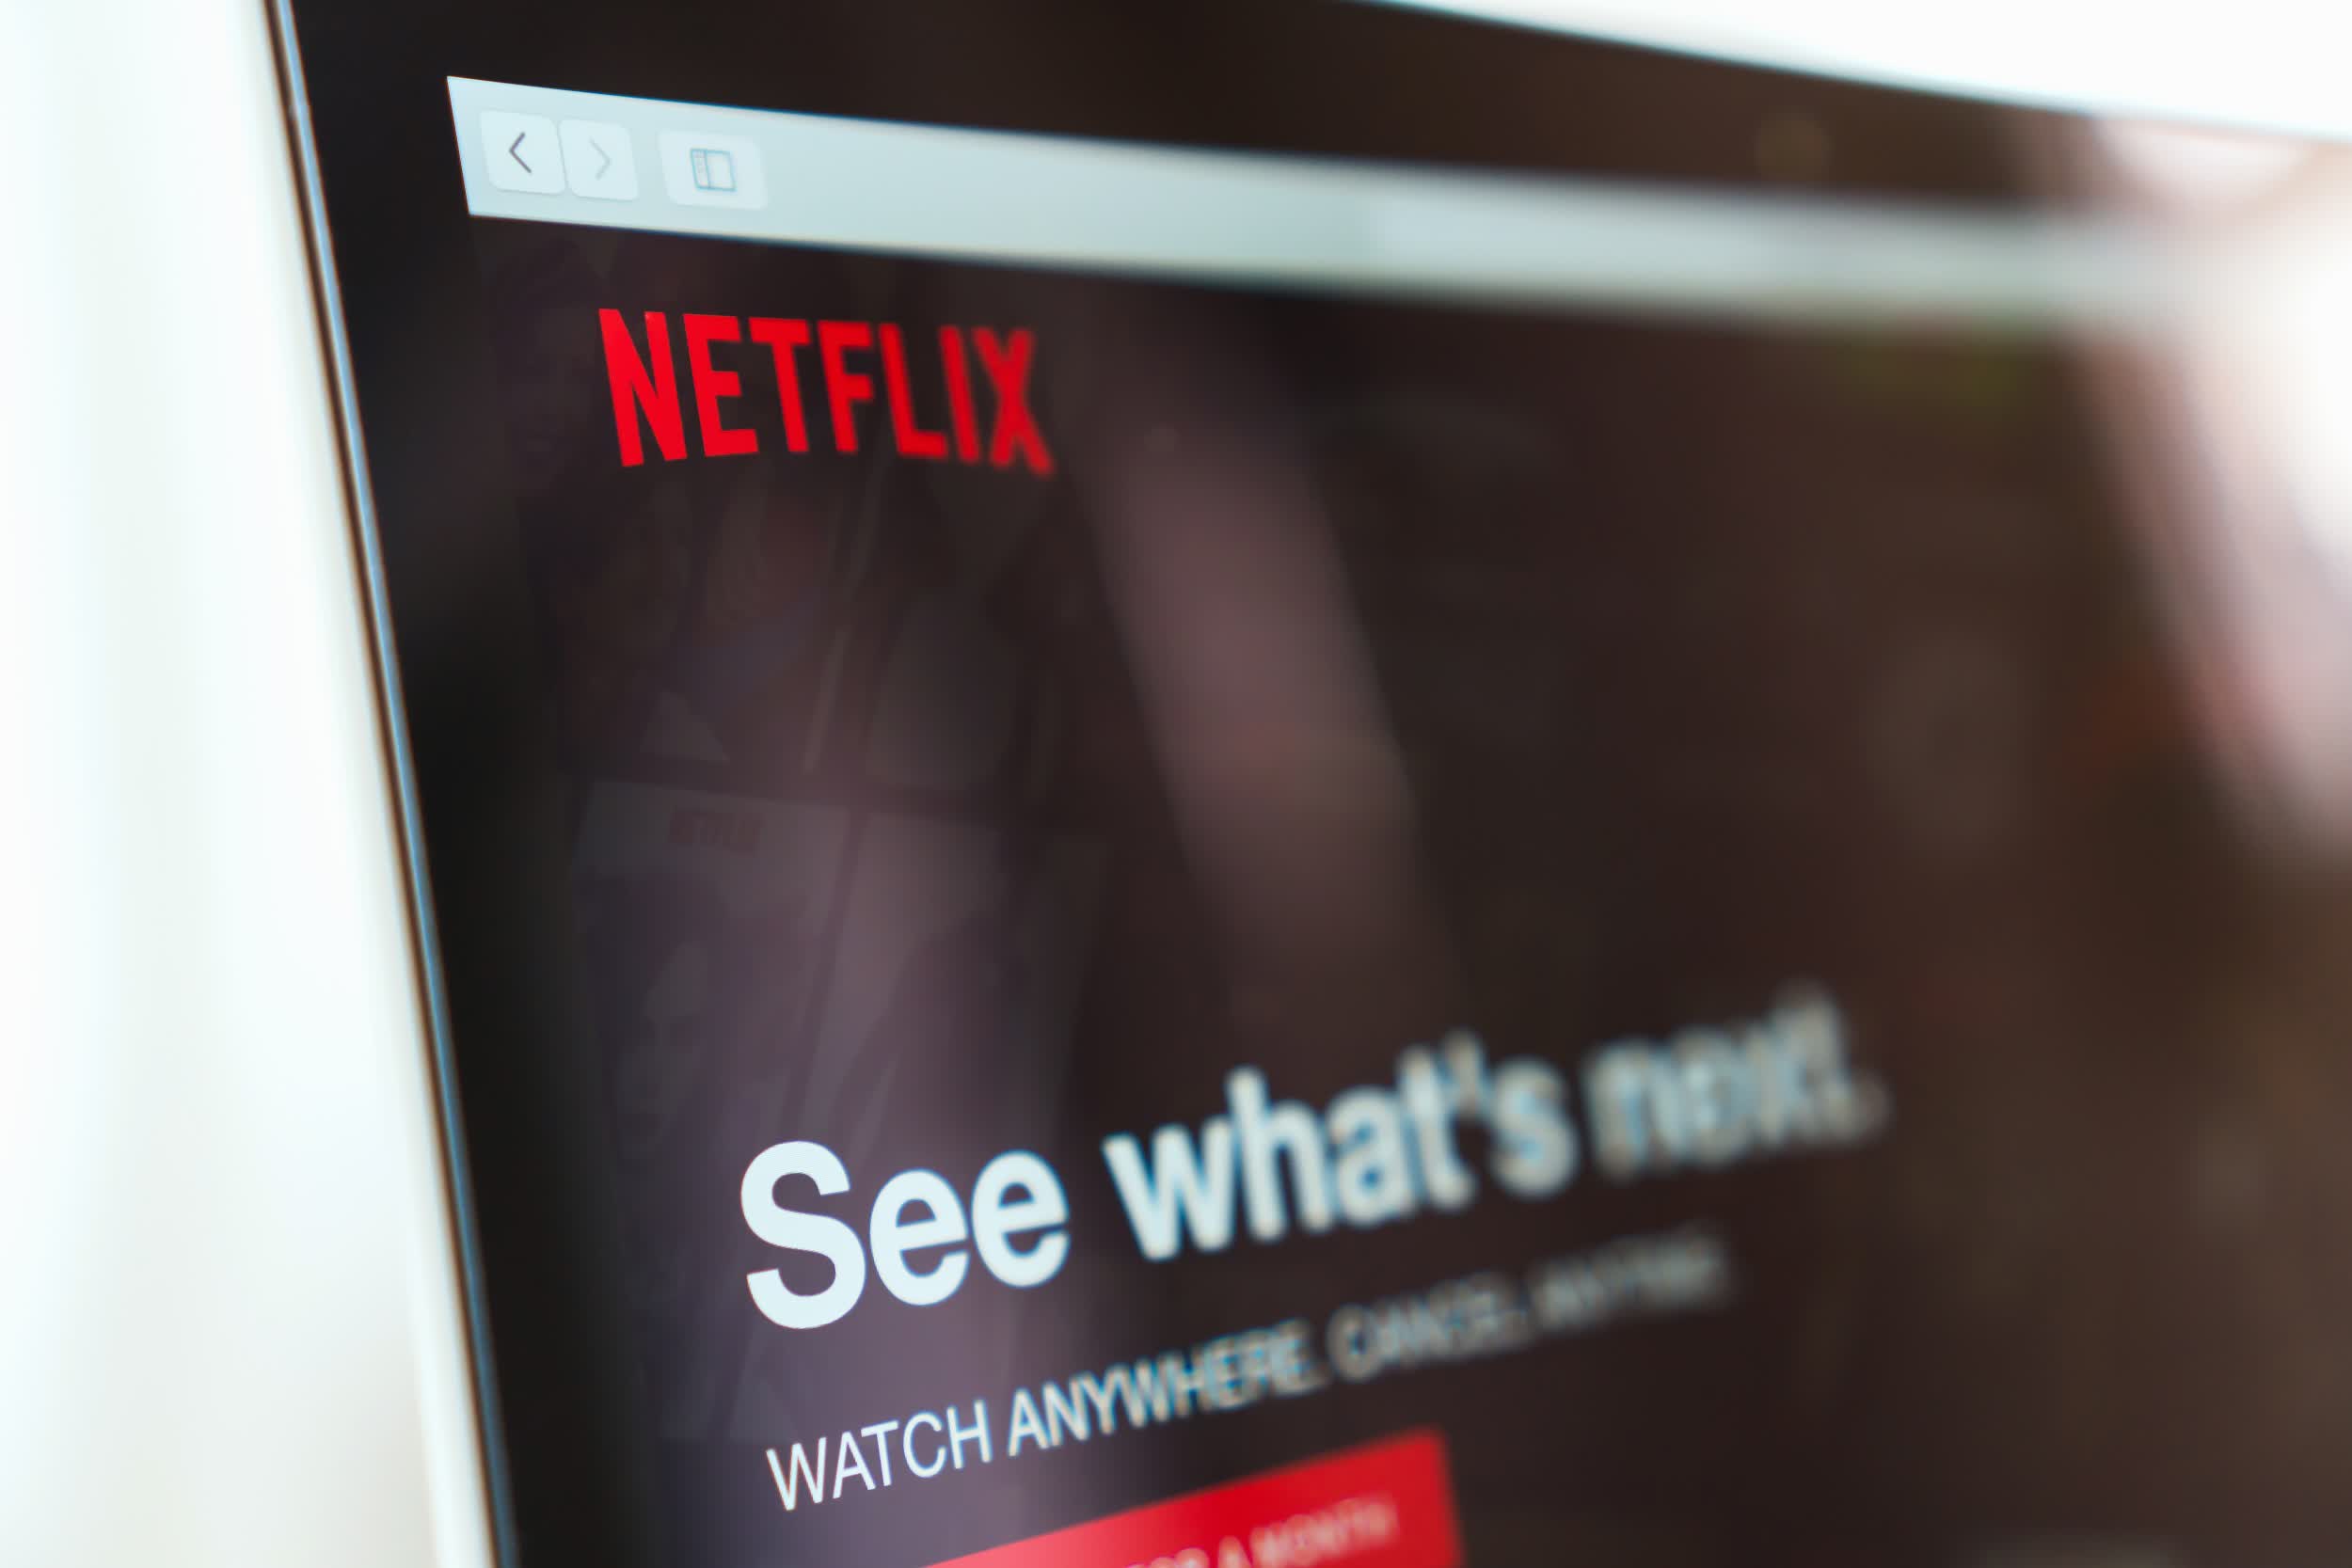 Netflix will release at least one new movie every week in 2021